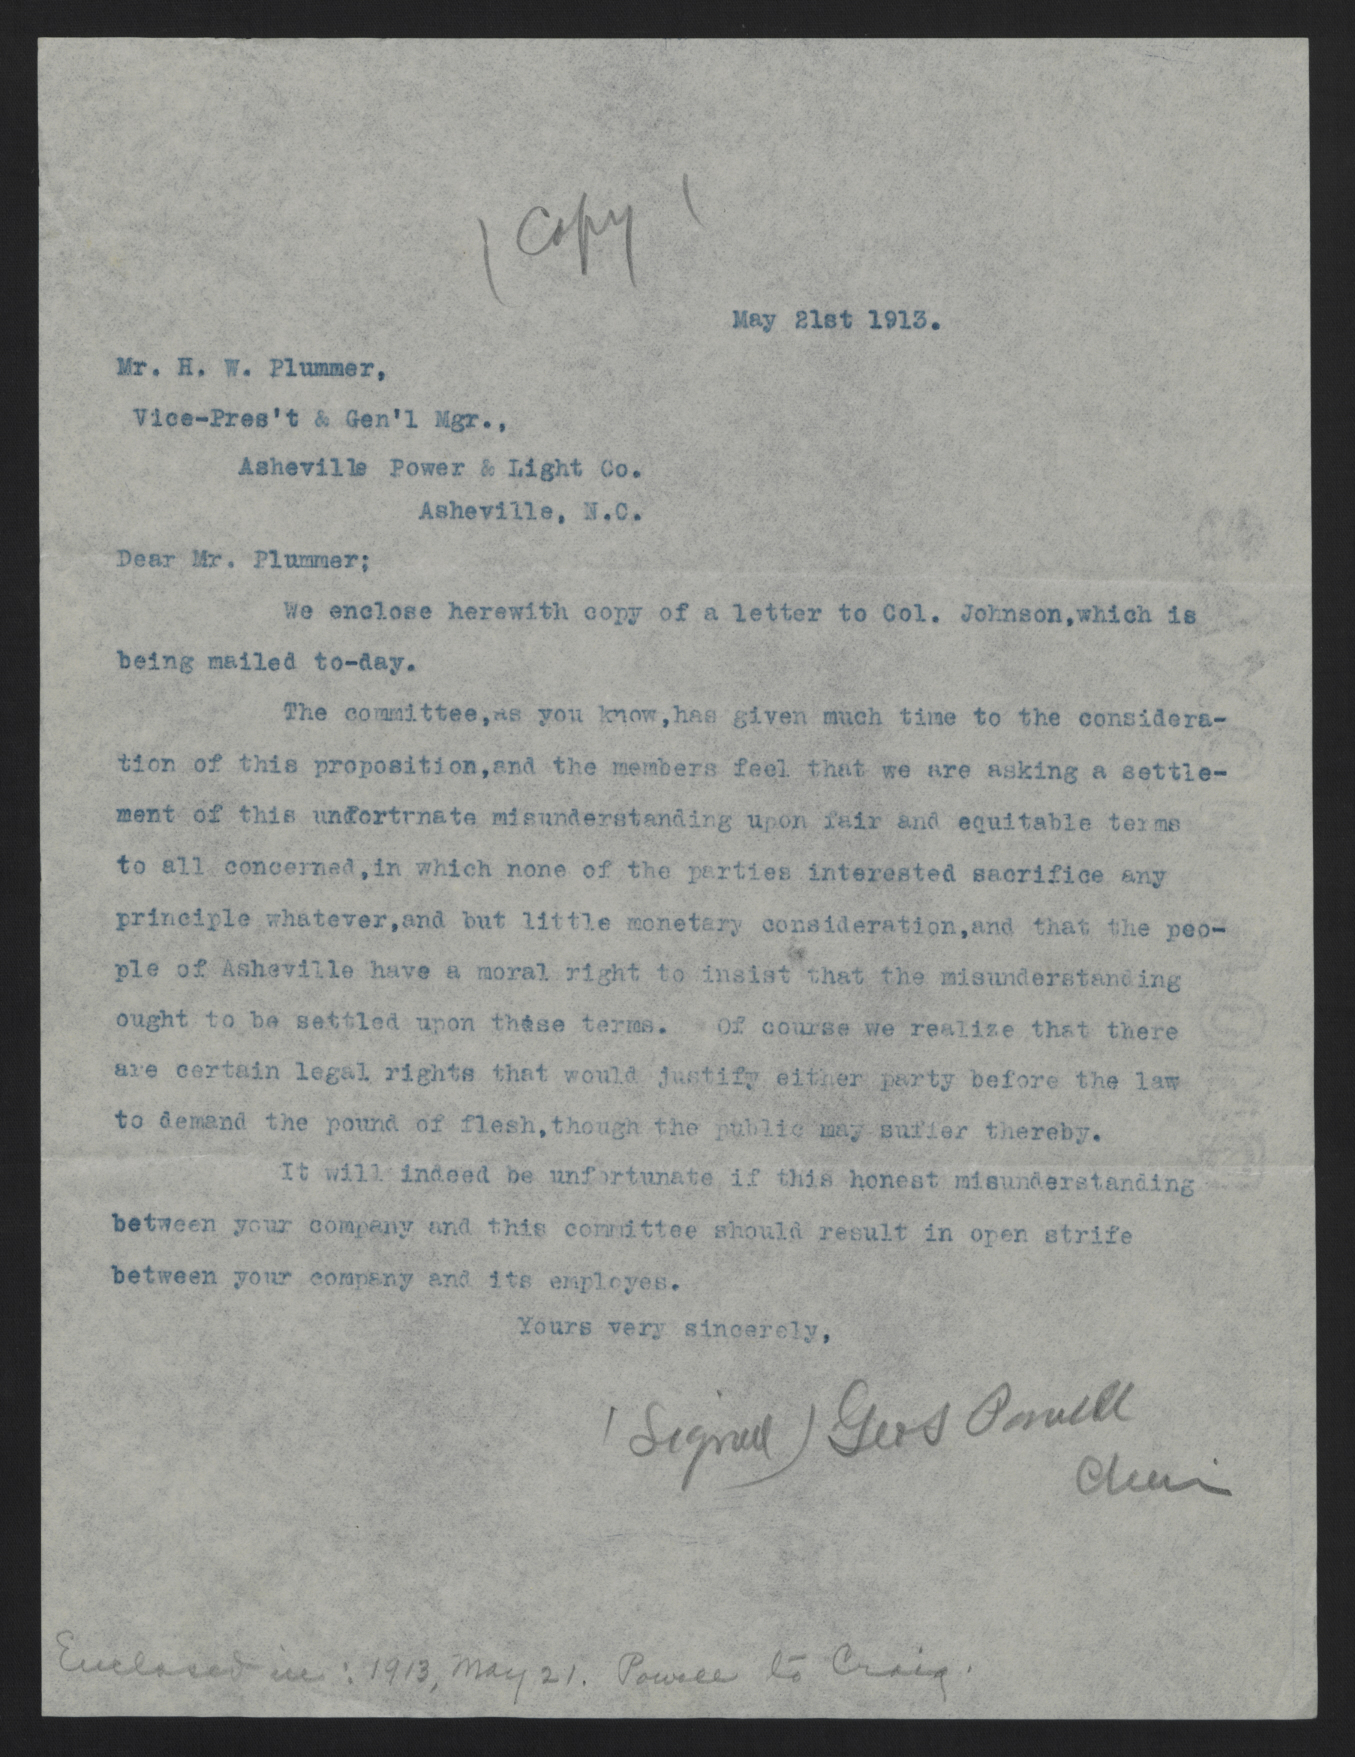 Letter from Powell to Plummer, May 21, 1913